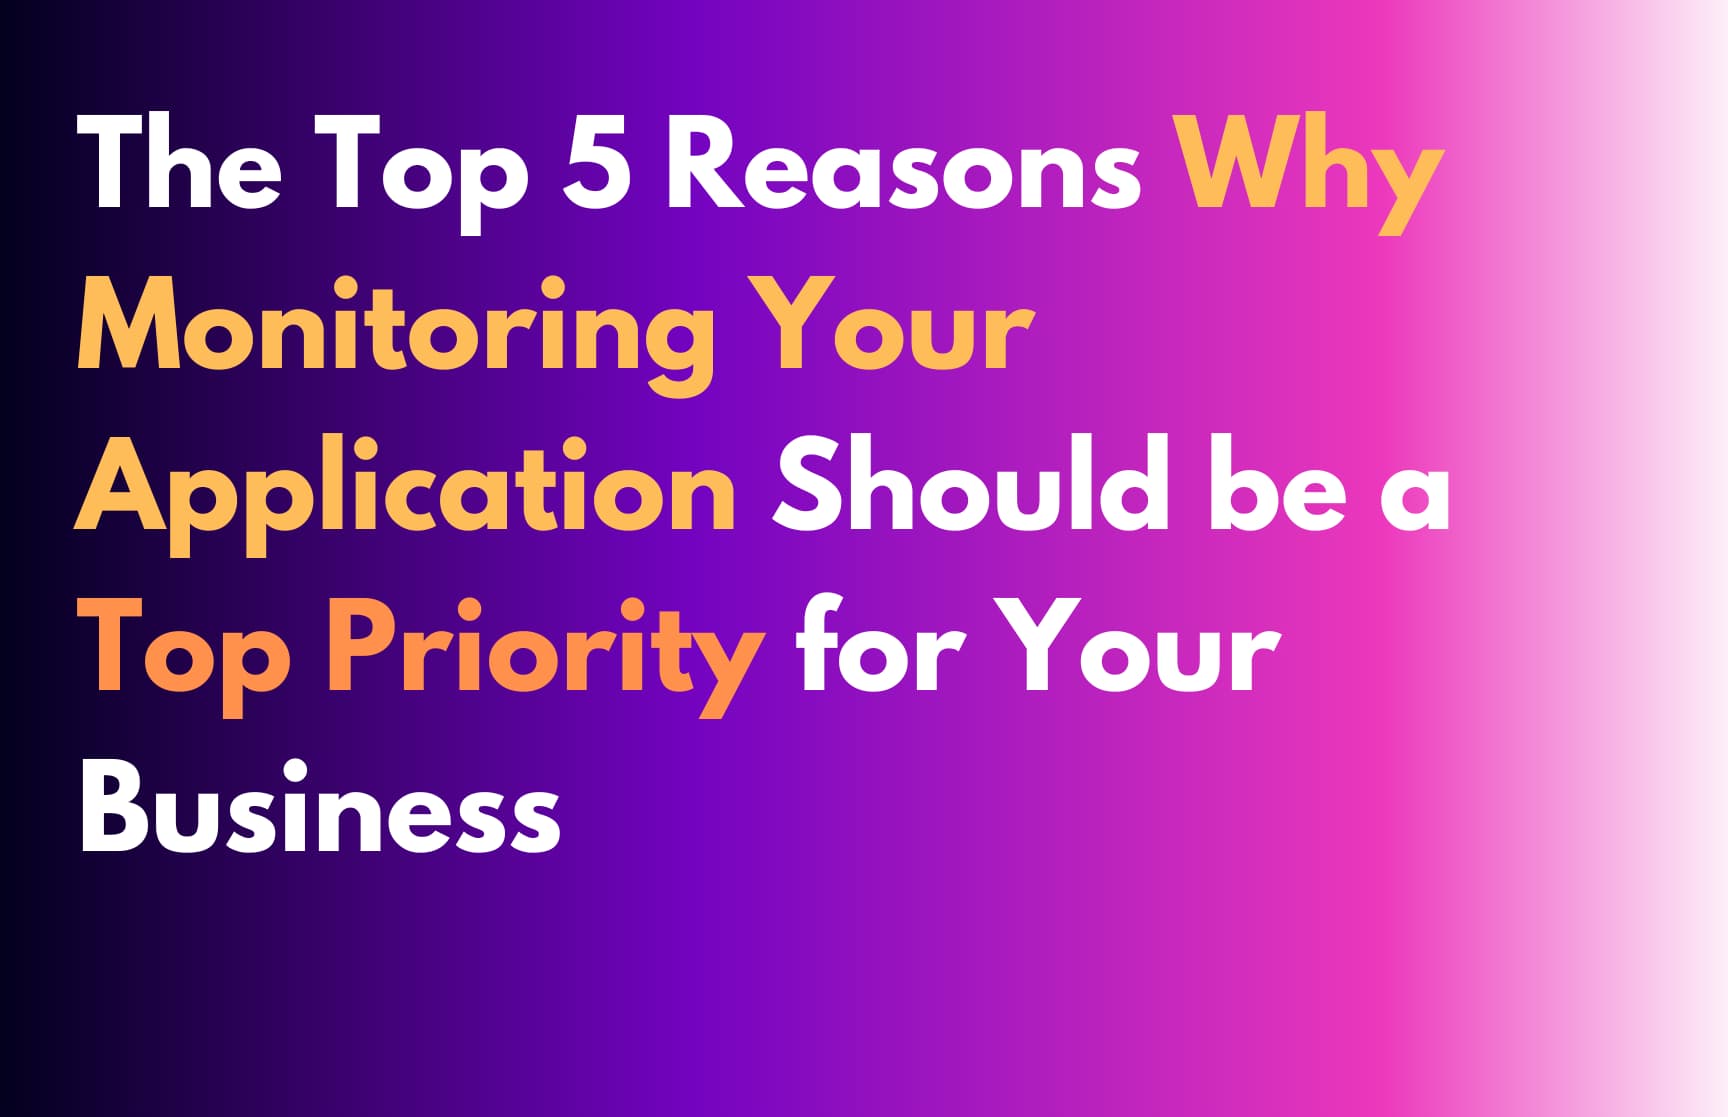 Cover image for The Top 5 Reasons Why Monitoring you Application is important